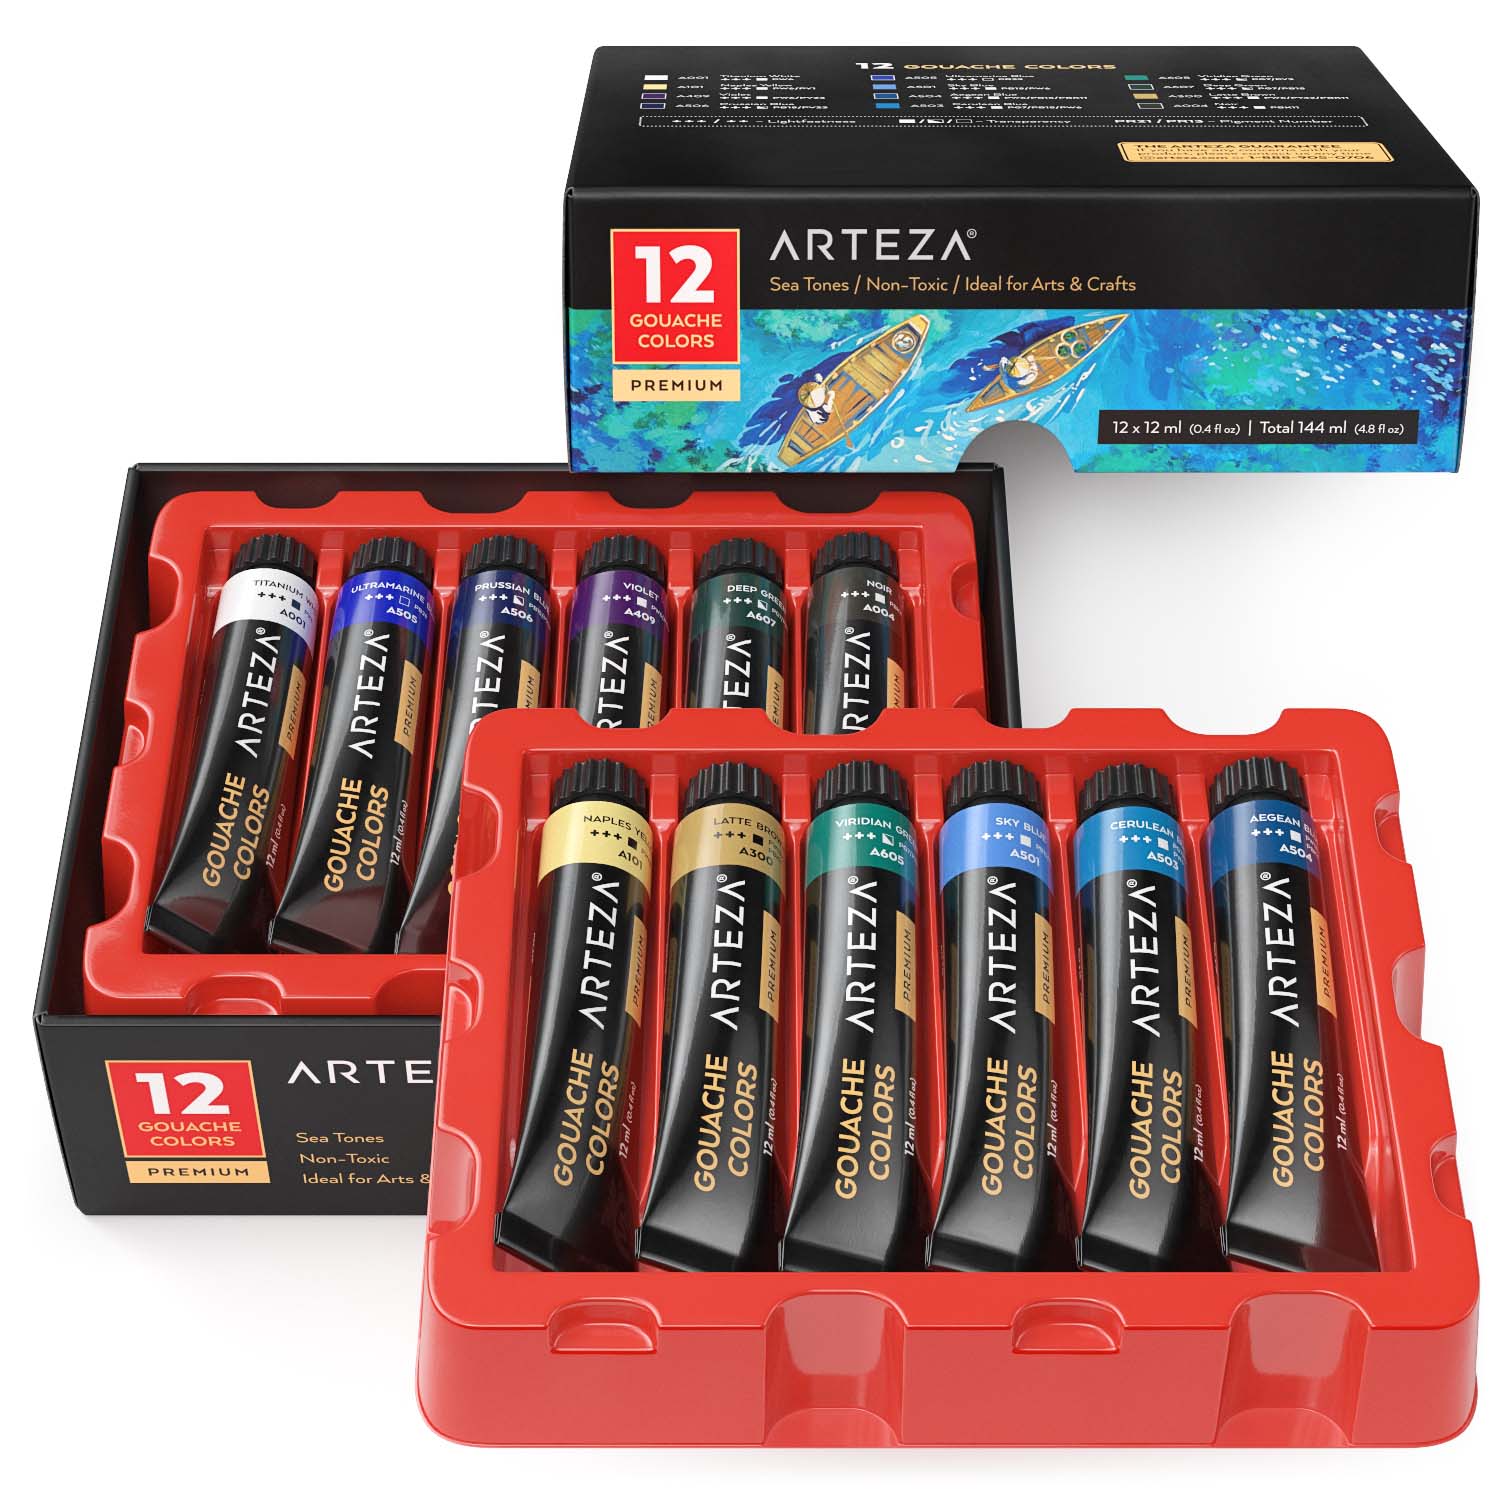  ARTEZA Acrylic and Gouache Paint Set Bundle, Painting Art  Supplies for Artist, Hobby Painters & Beginners : Arts, Crafts & Sewing